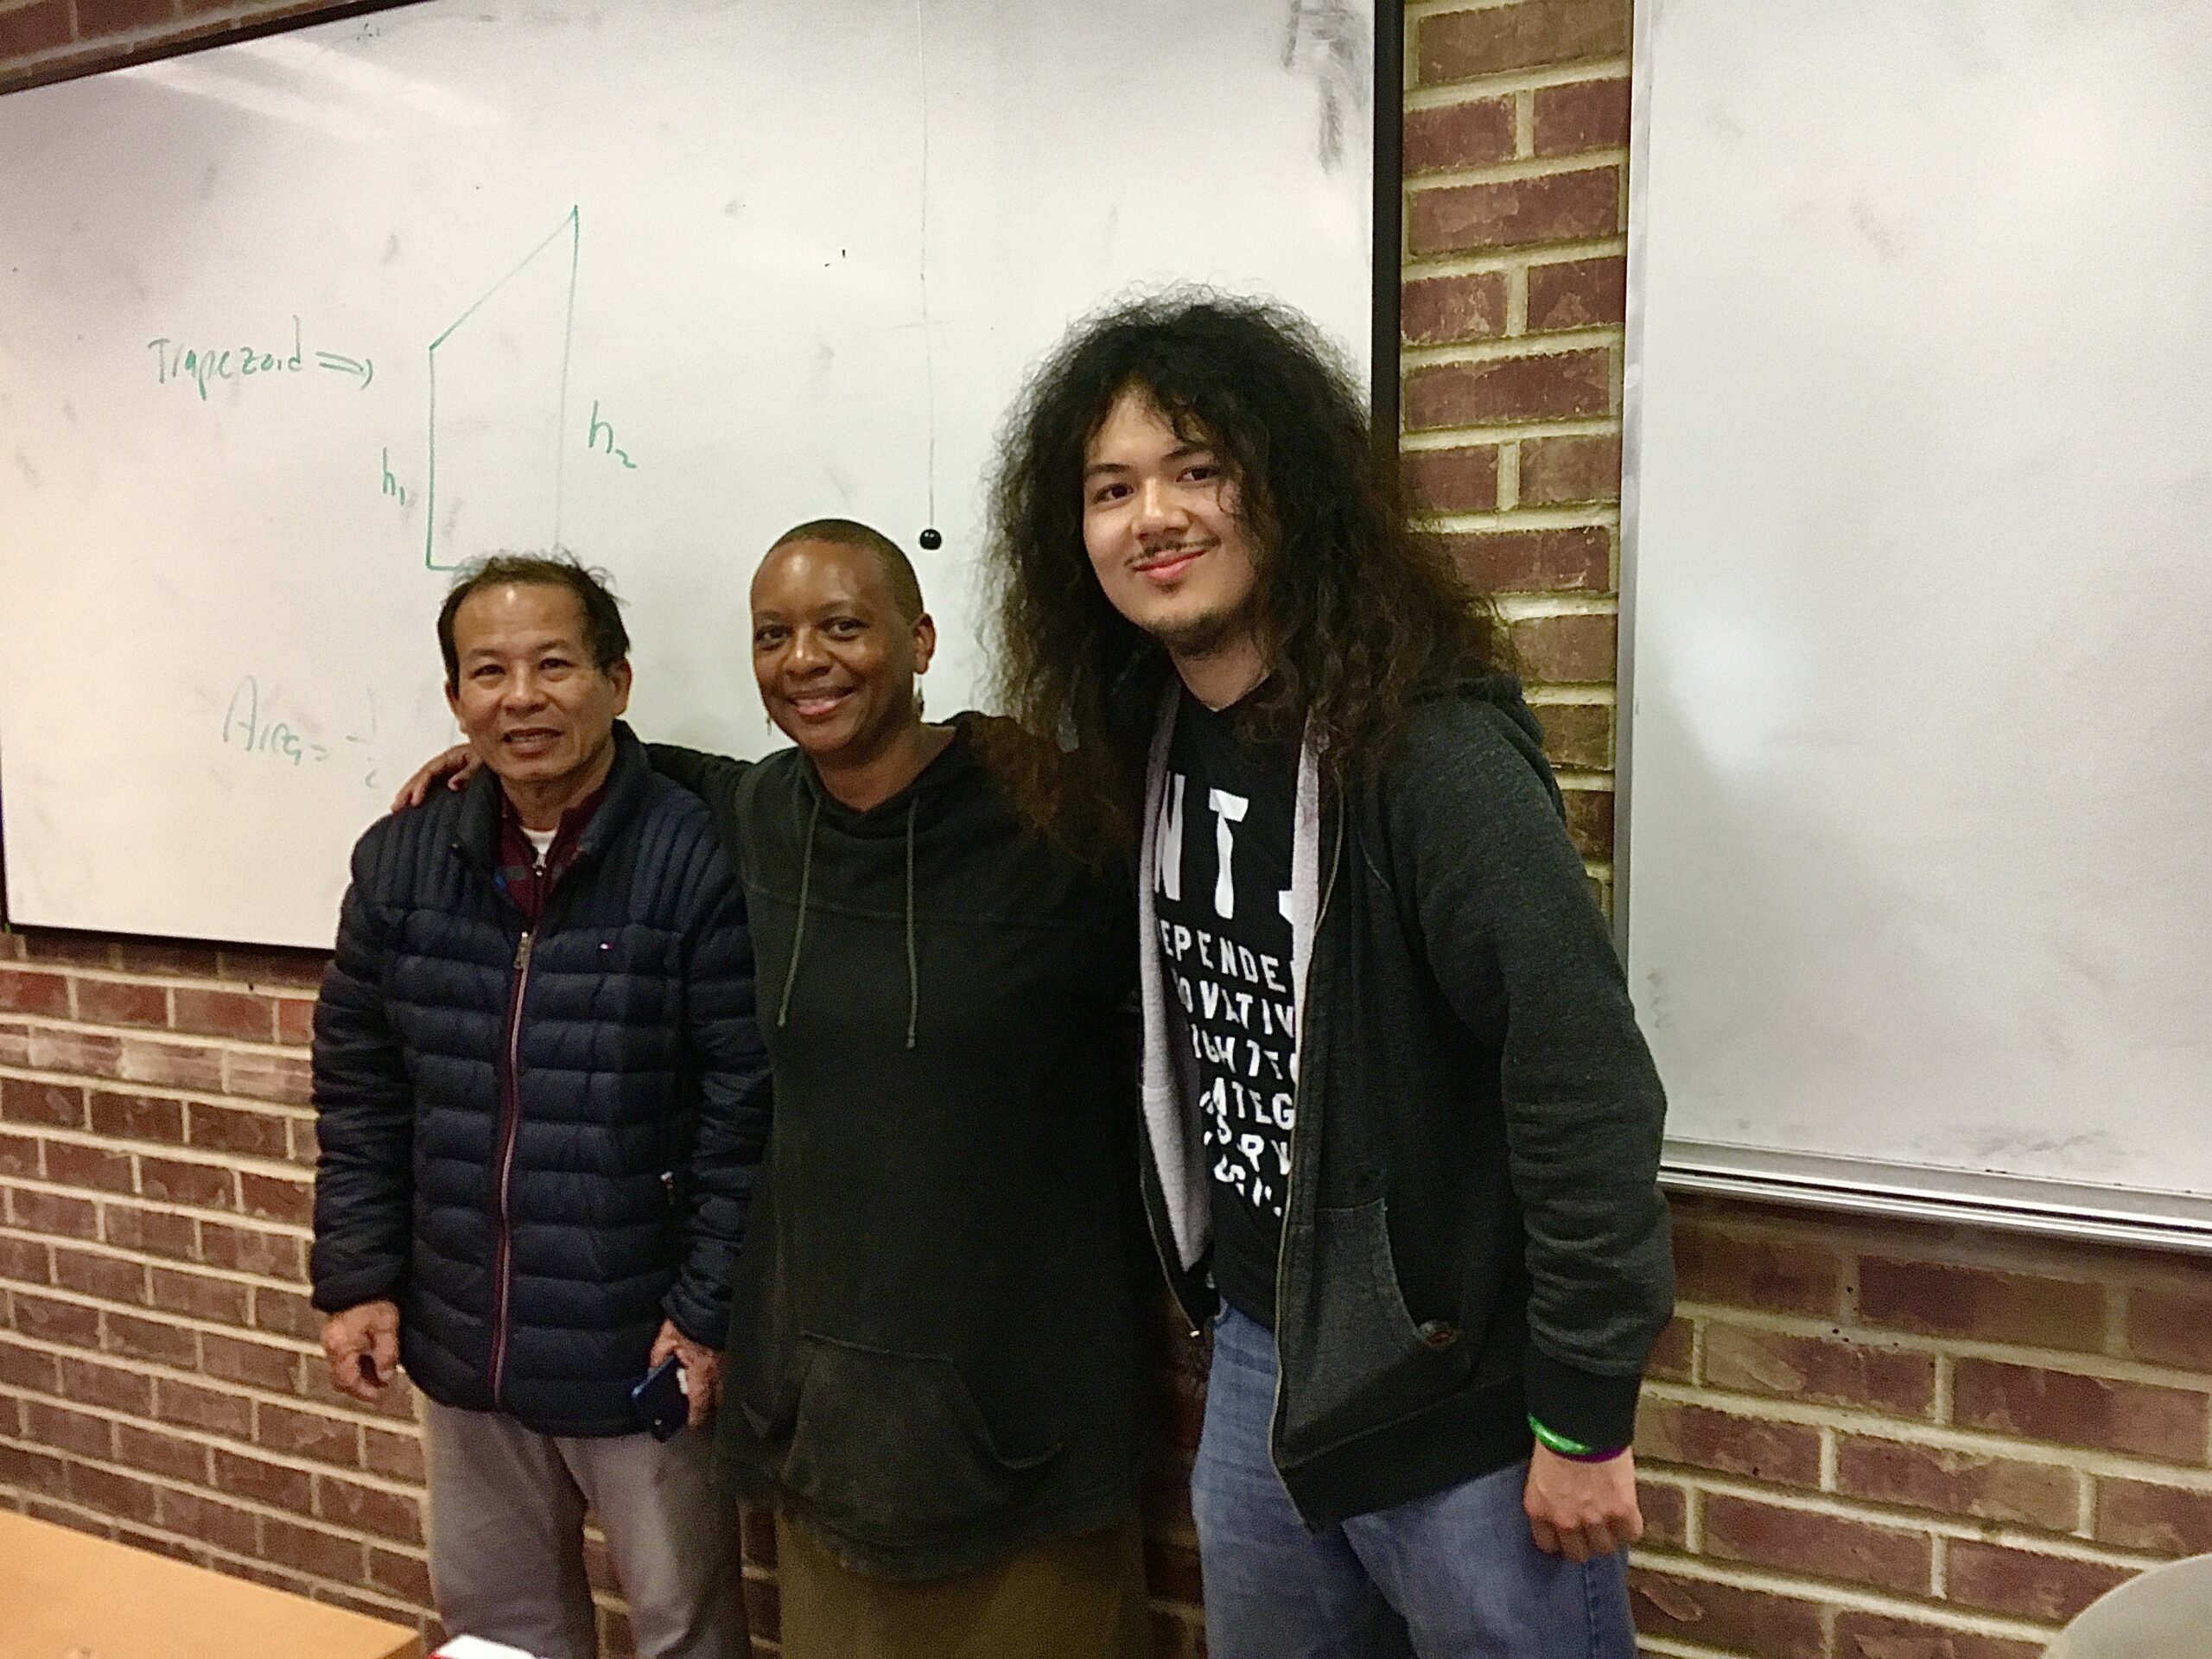 Three people line up in front of a whiteboard to take a photo: an elder Asian American man, an African American woman college instructor, and a young man with long hair.